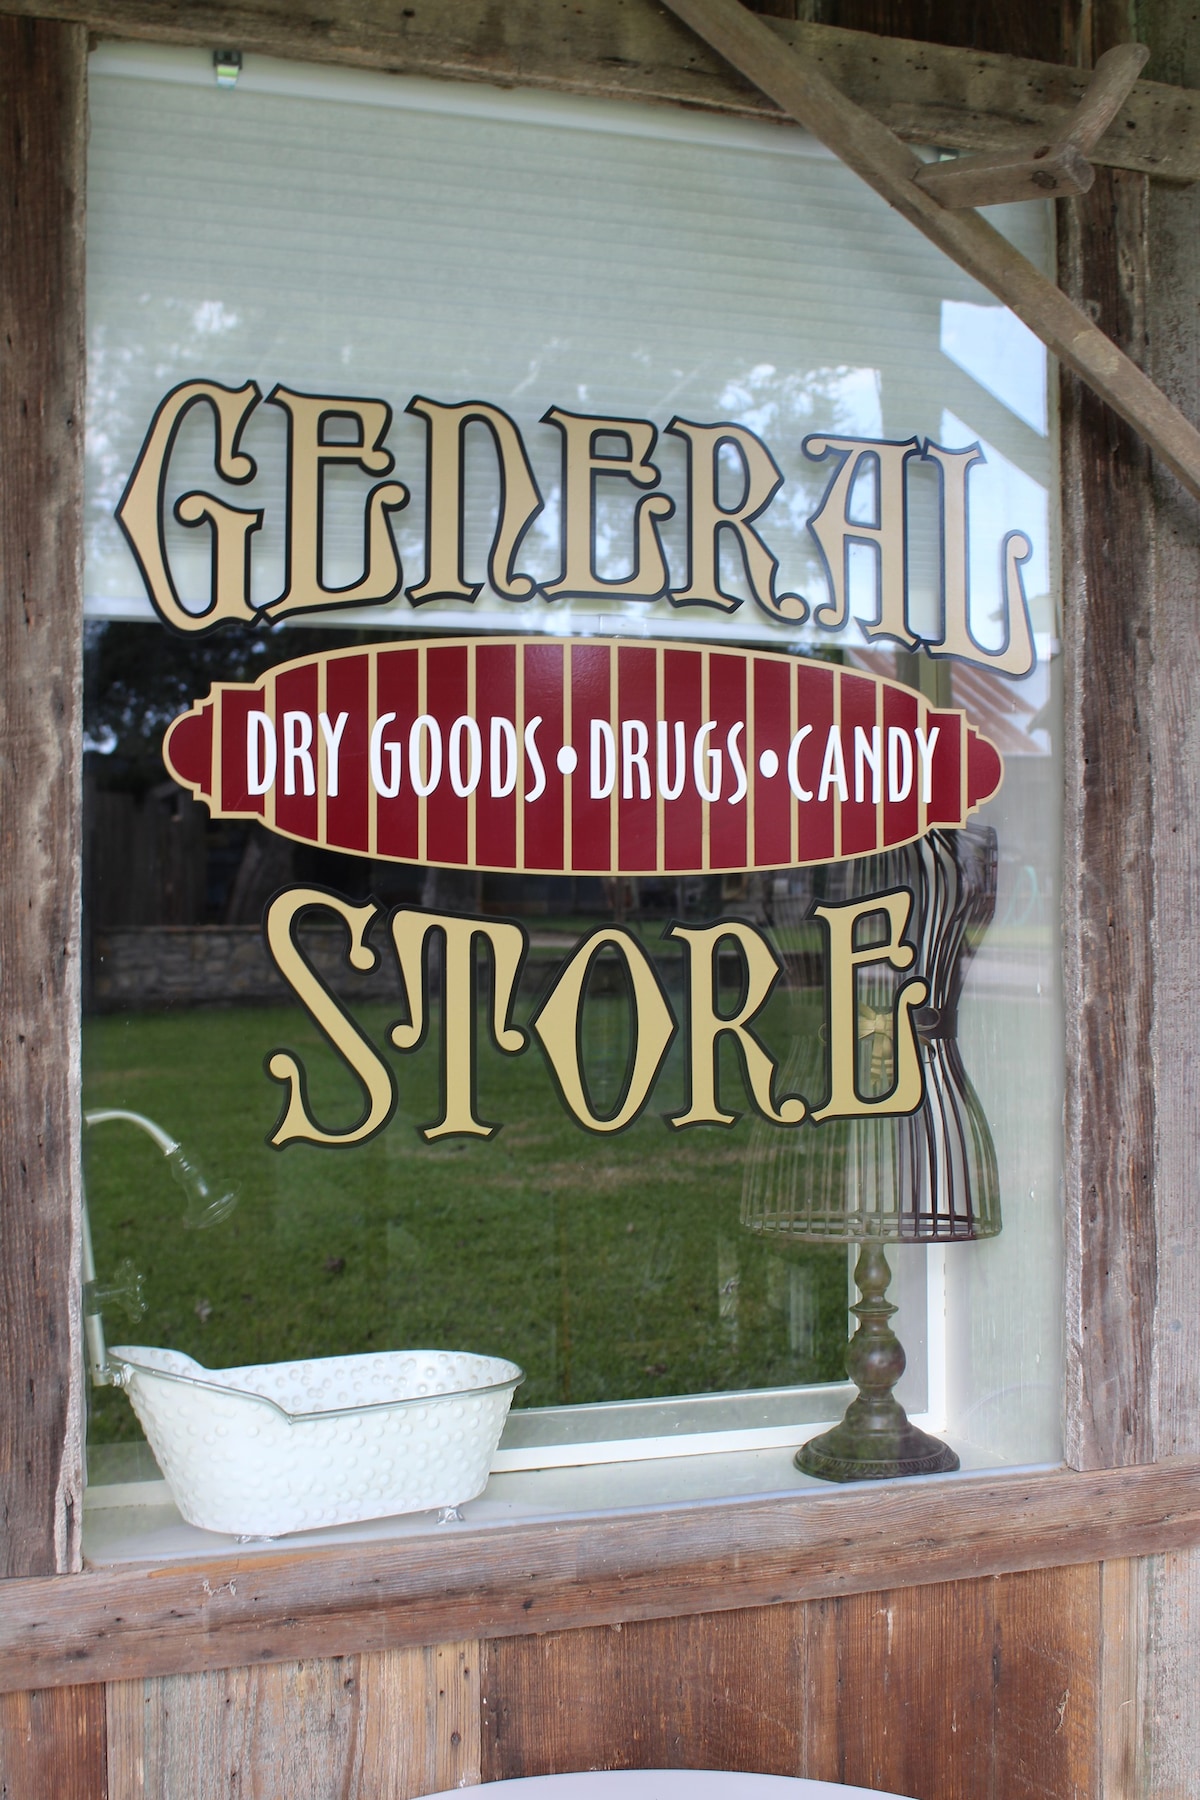 The General Store-@Rooms at The Oak Dale